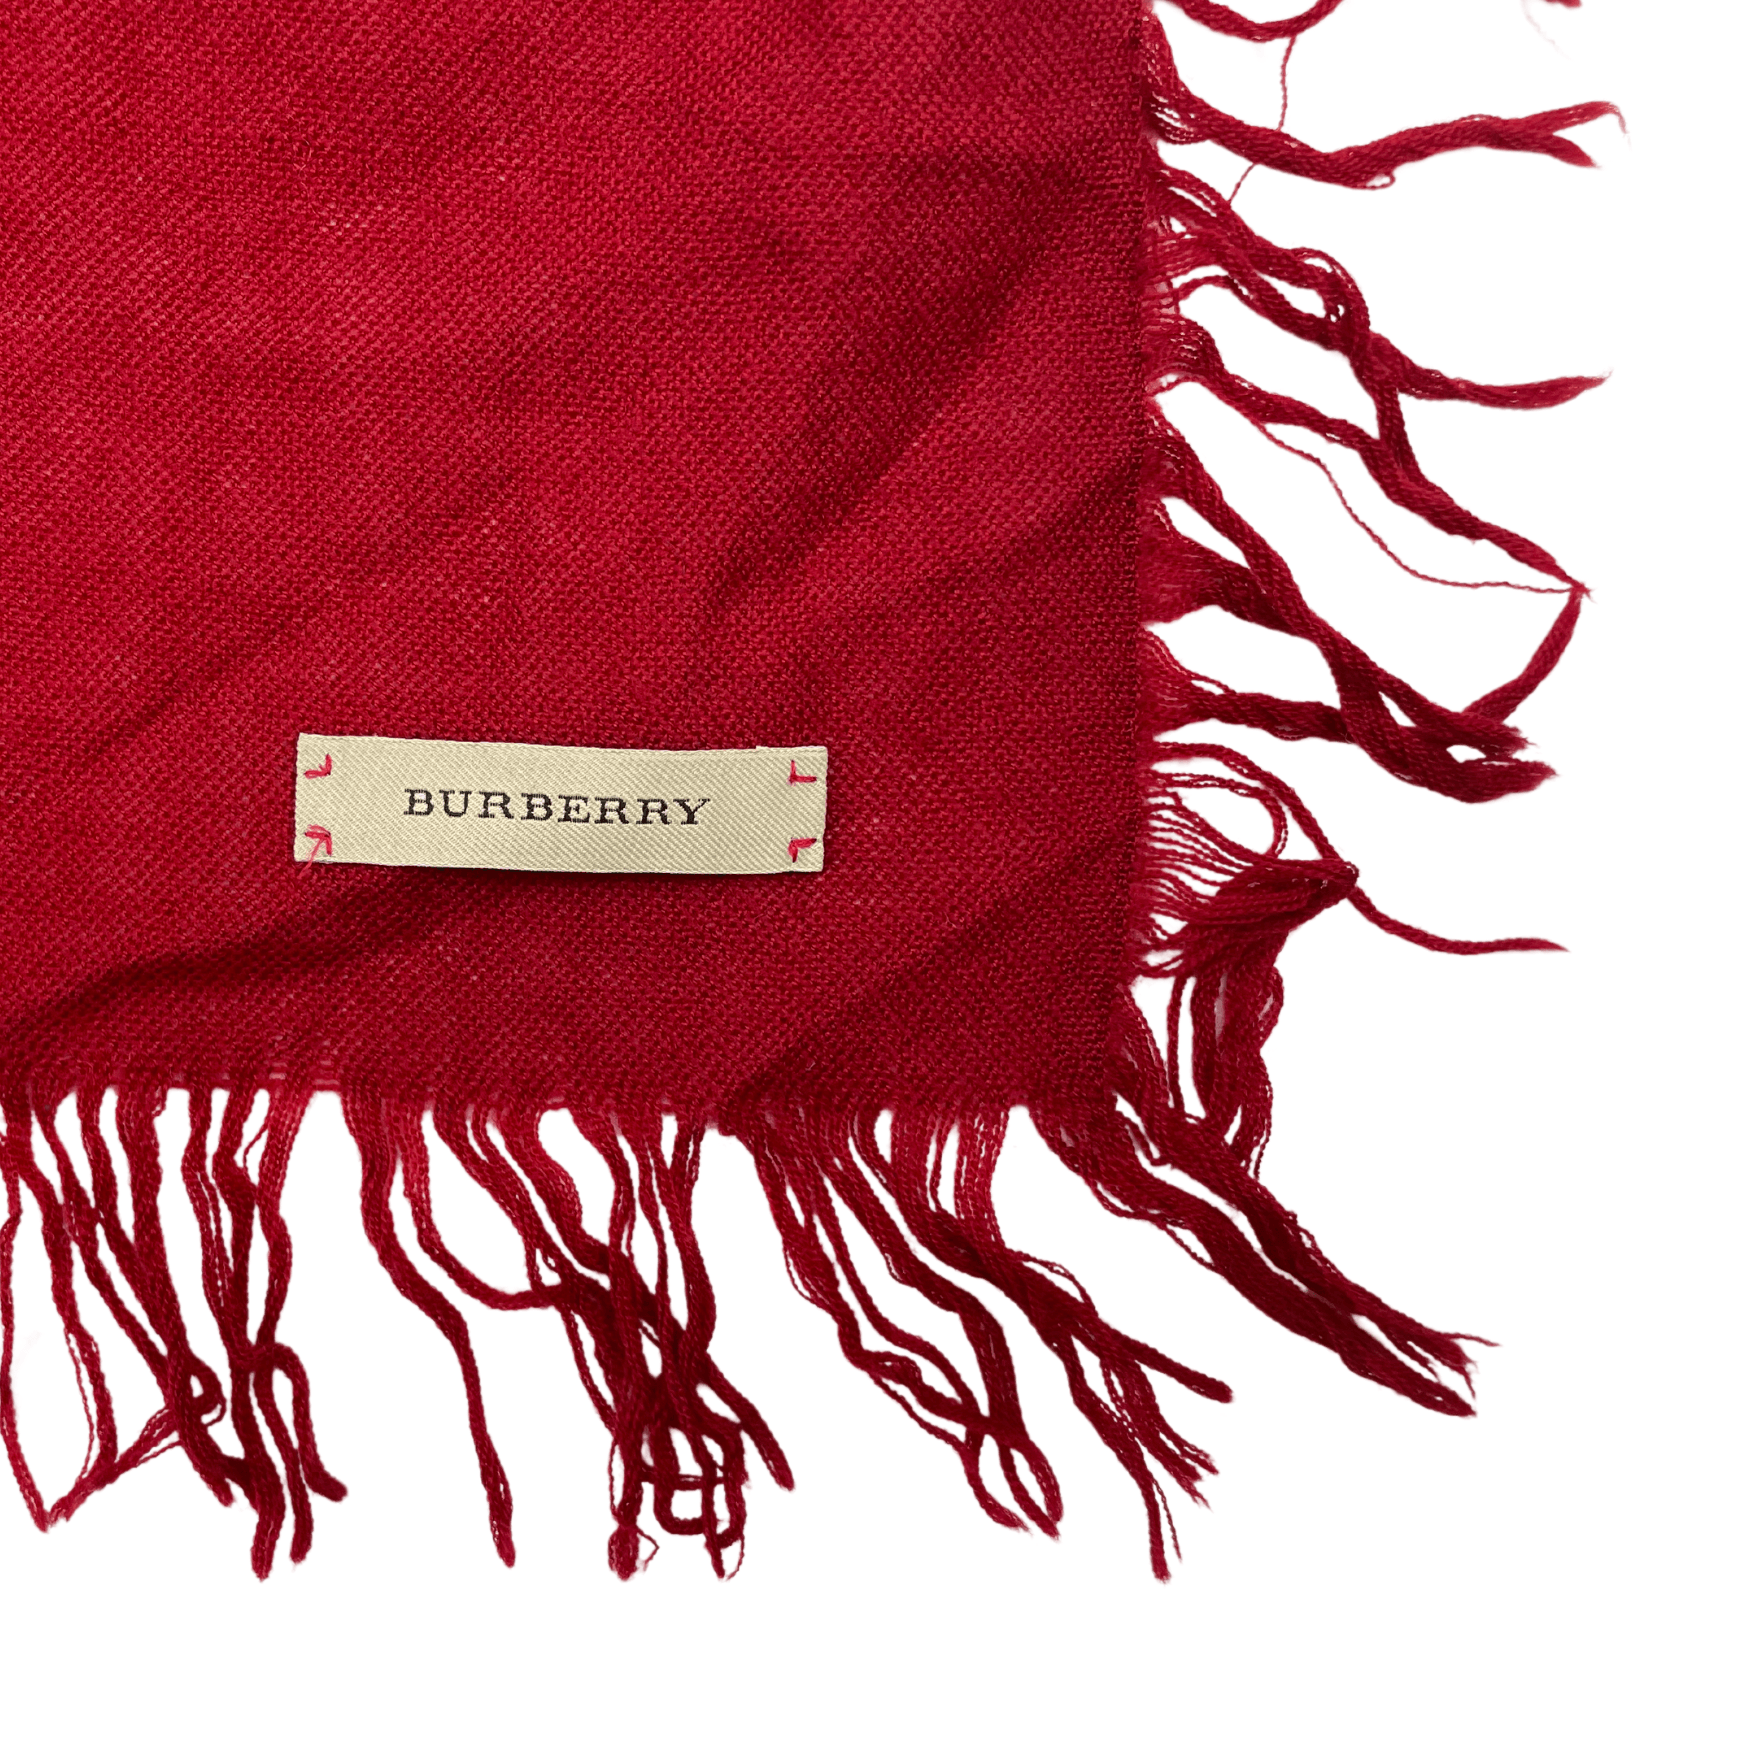 Burberry Scarf - Fashionably Yours